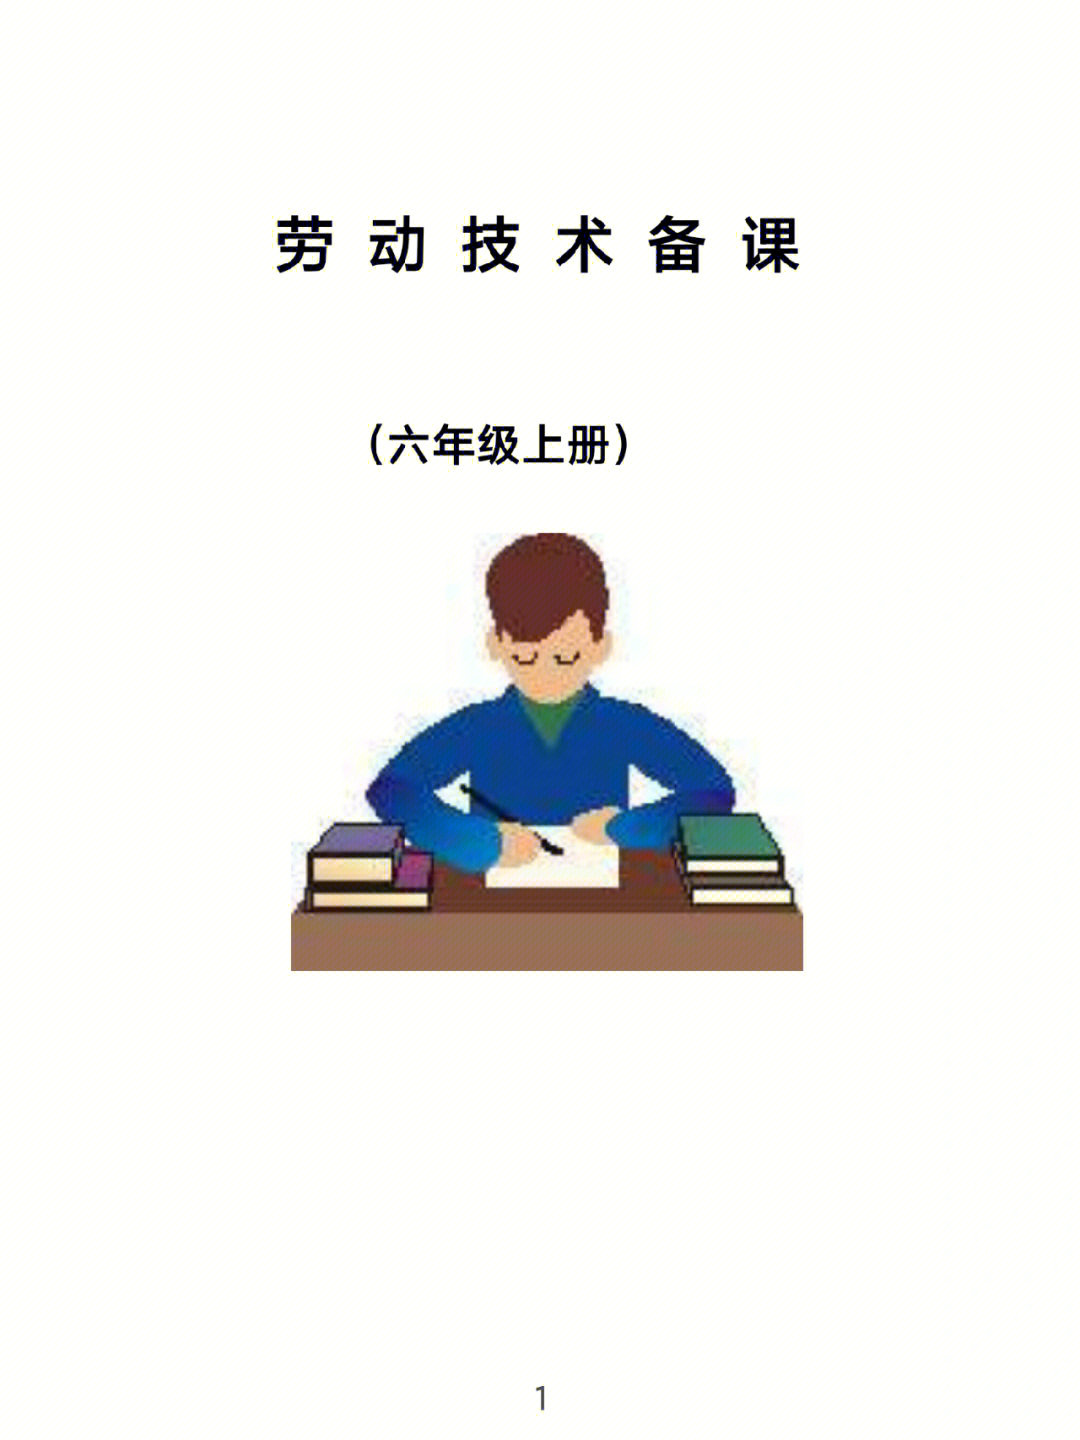 What do children in the Chinese studies class do housework_What do children in the Chinese study class do